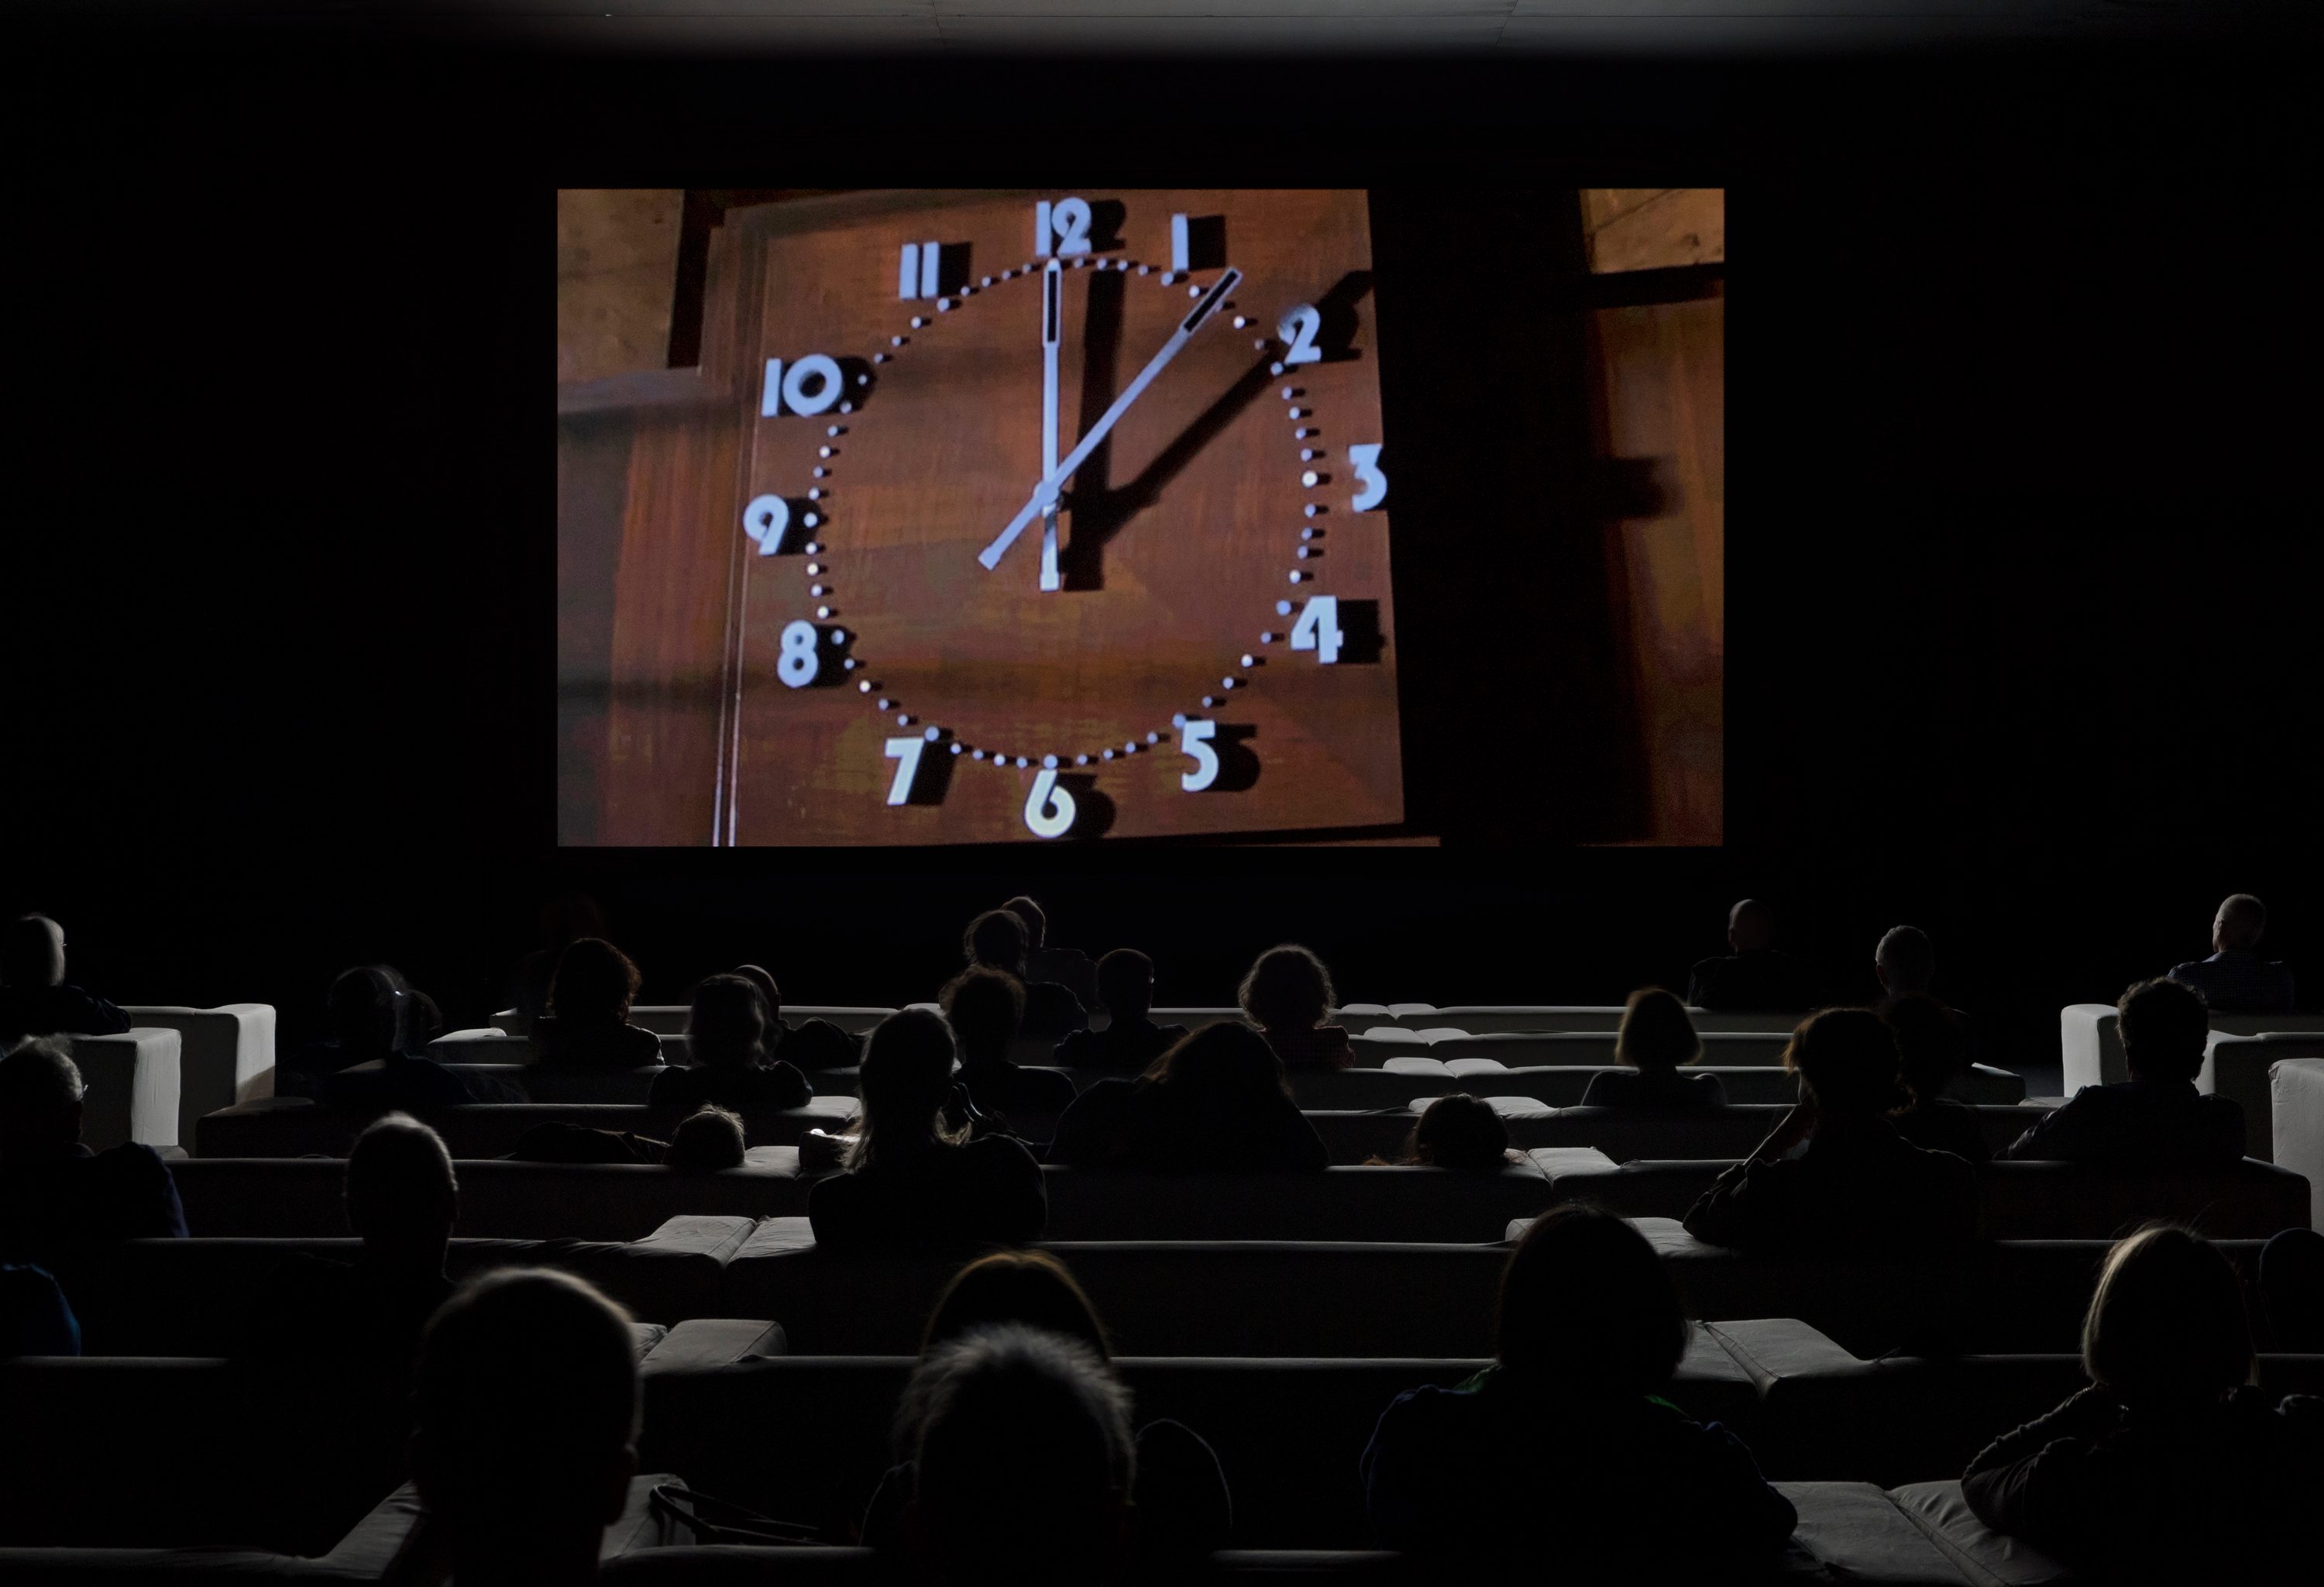 “The Clock”, Christian Marclay, 2010, courtesy White Cube, London and Paula Cooper Gallery, New York.